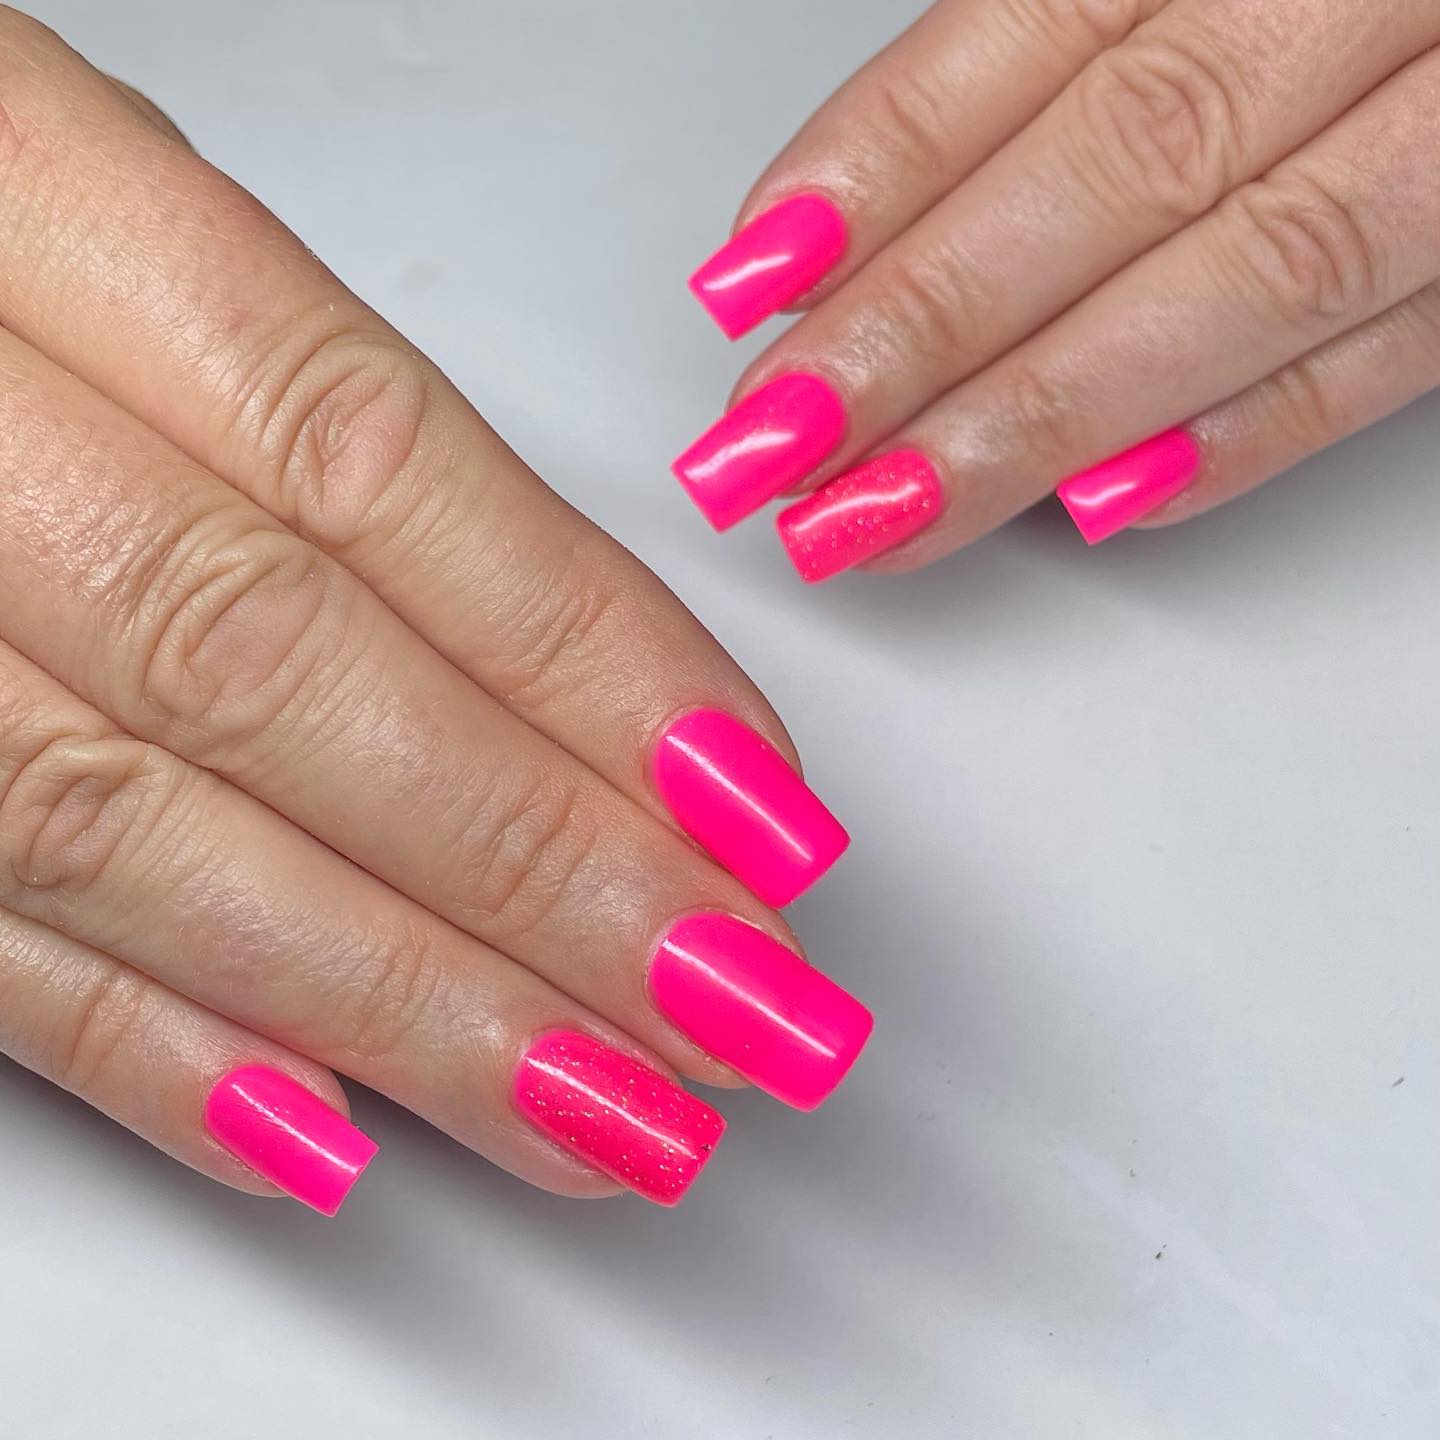 It is absolutely amazing to have this neon pink in nails, isn't it? It is super-bright and stunning. Give it a shot.